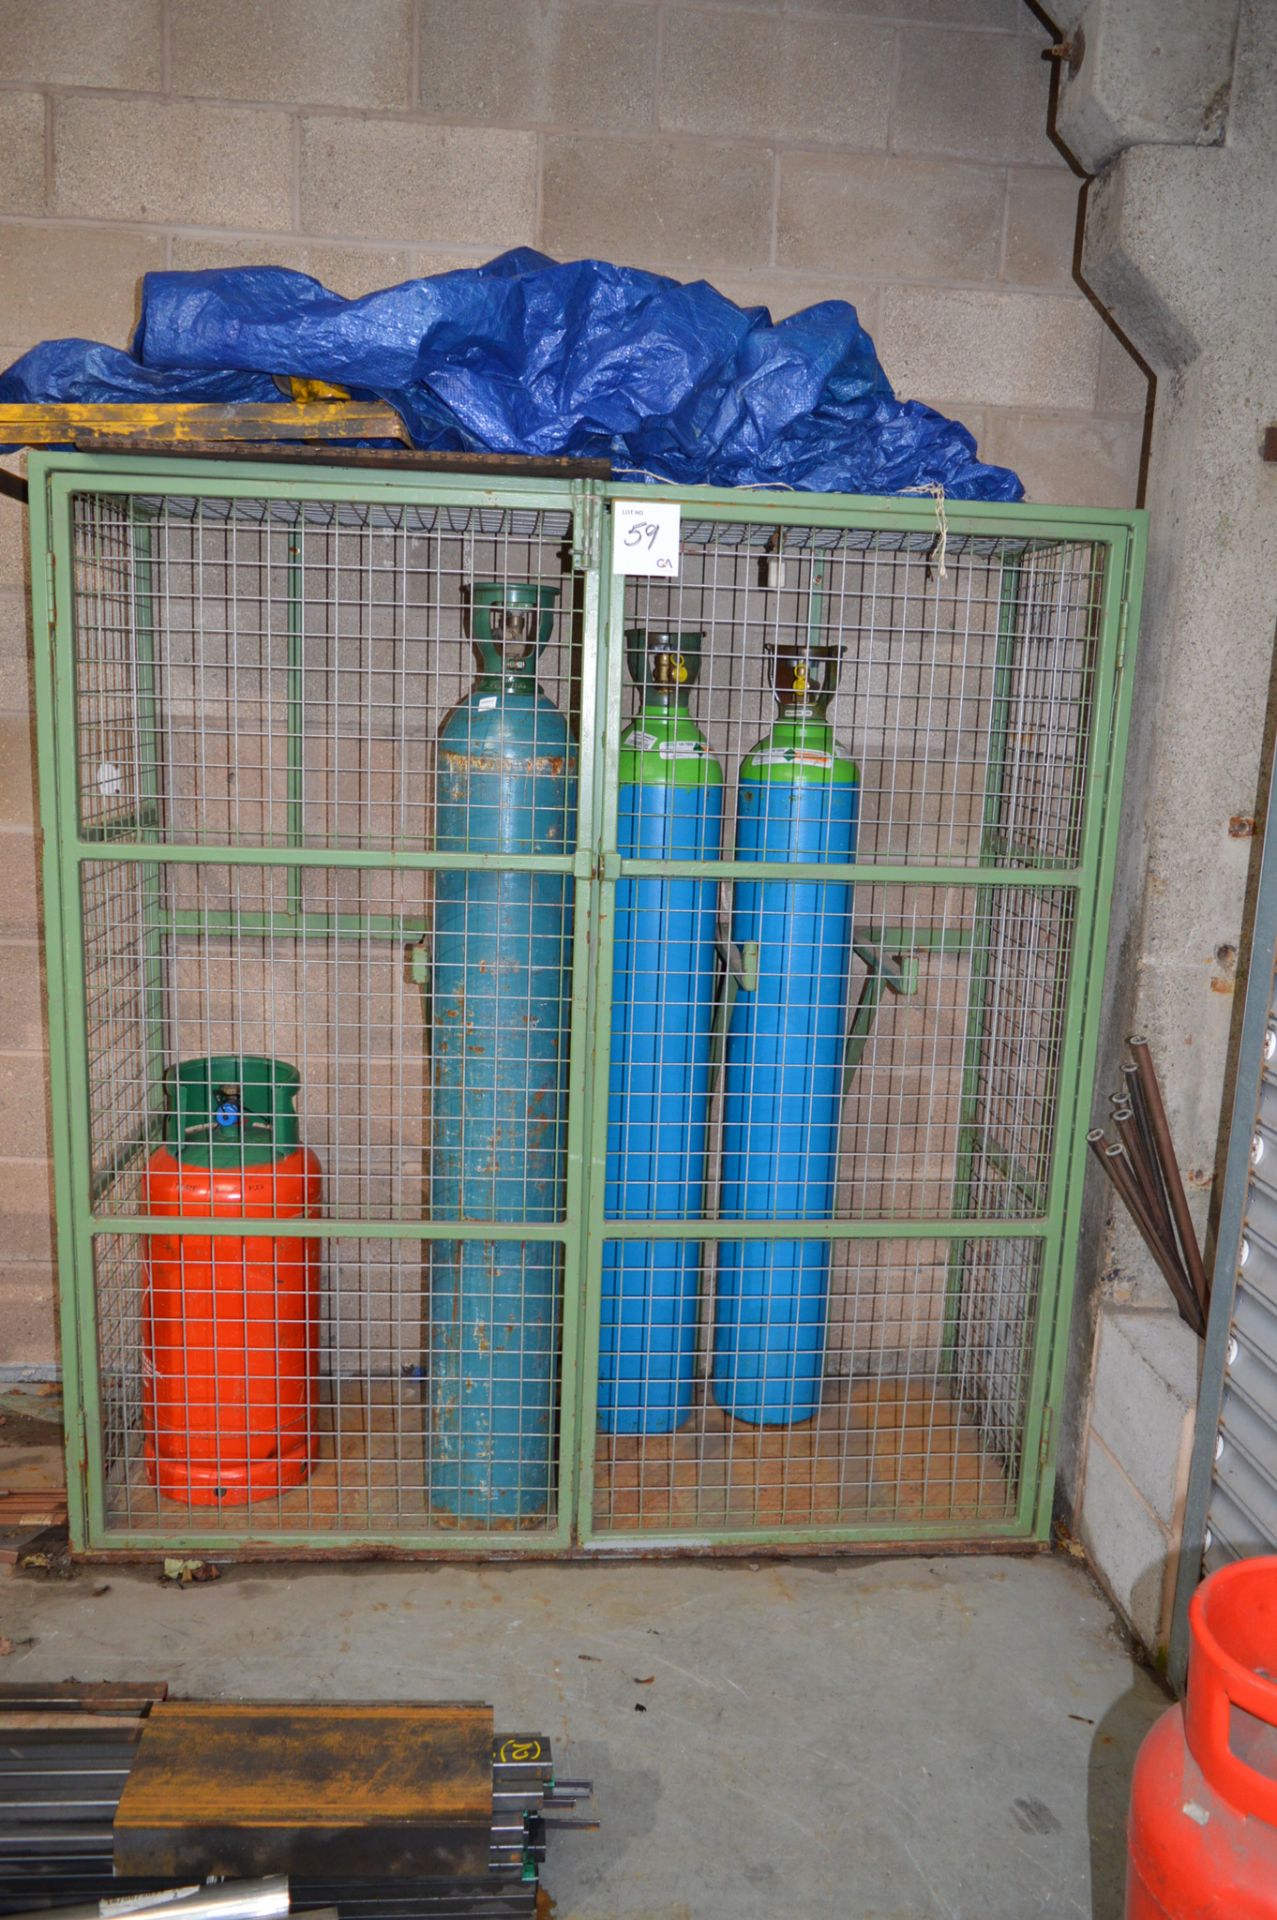 Fabricated steel bottle storage cage Approx. 1700mm x 650mm x 1800mm high ** Not including